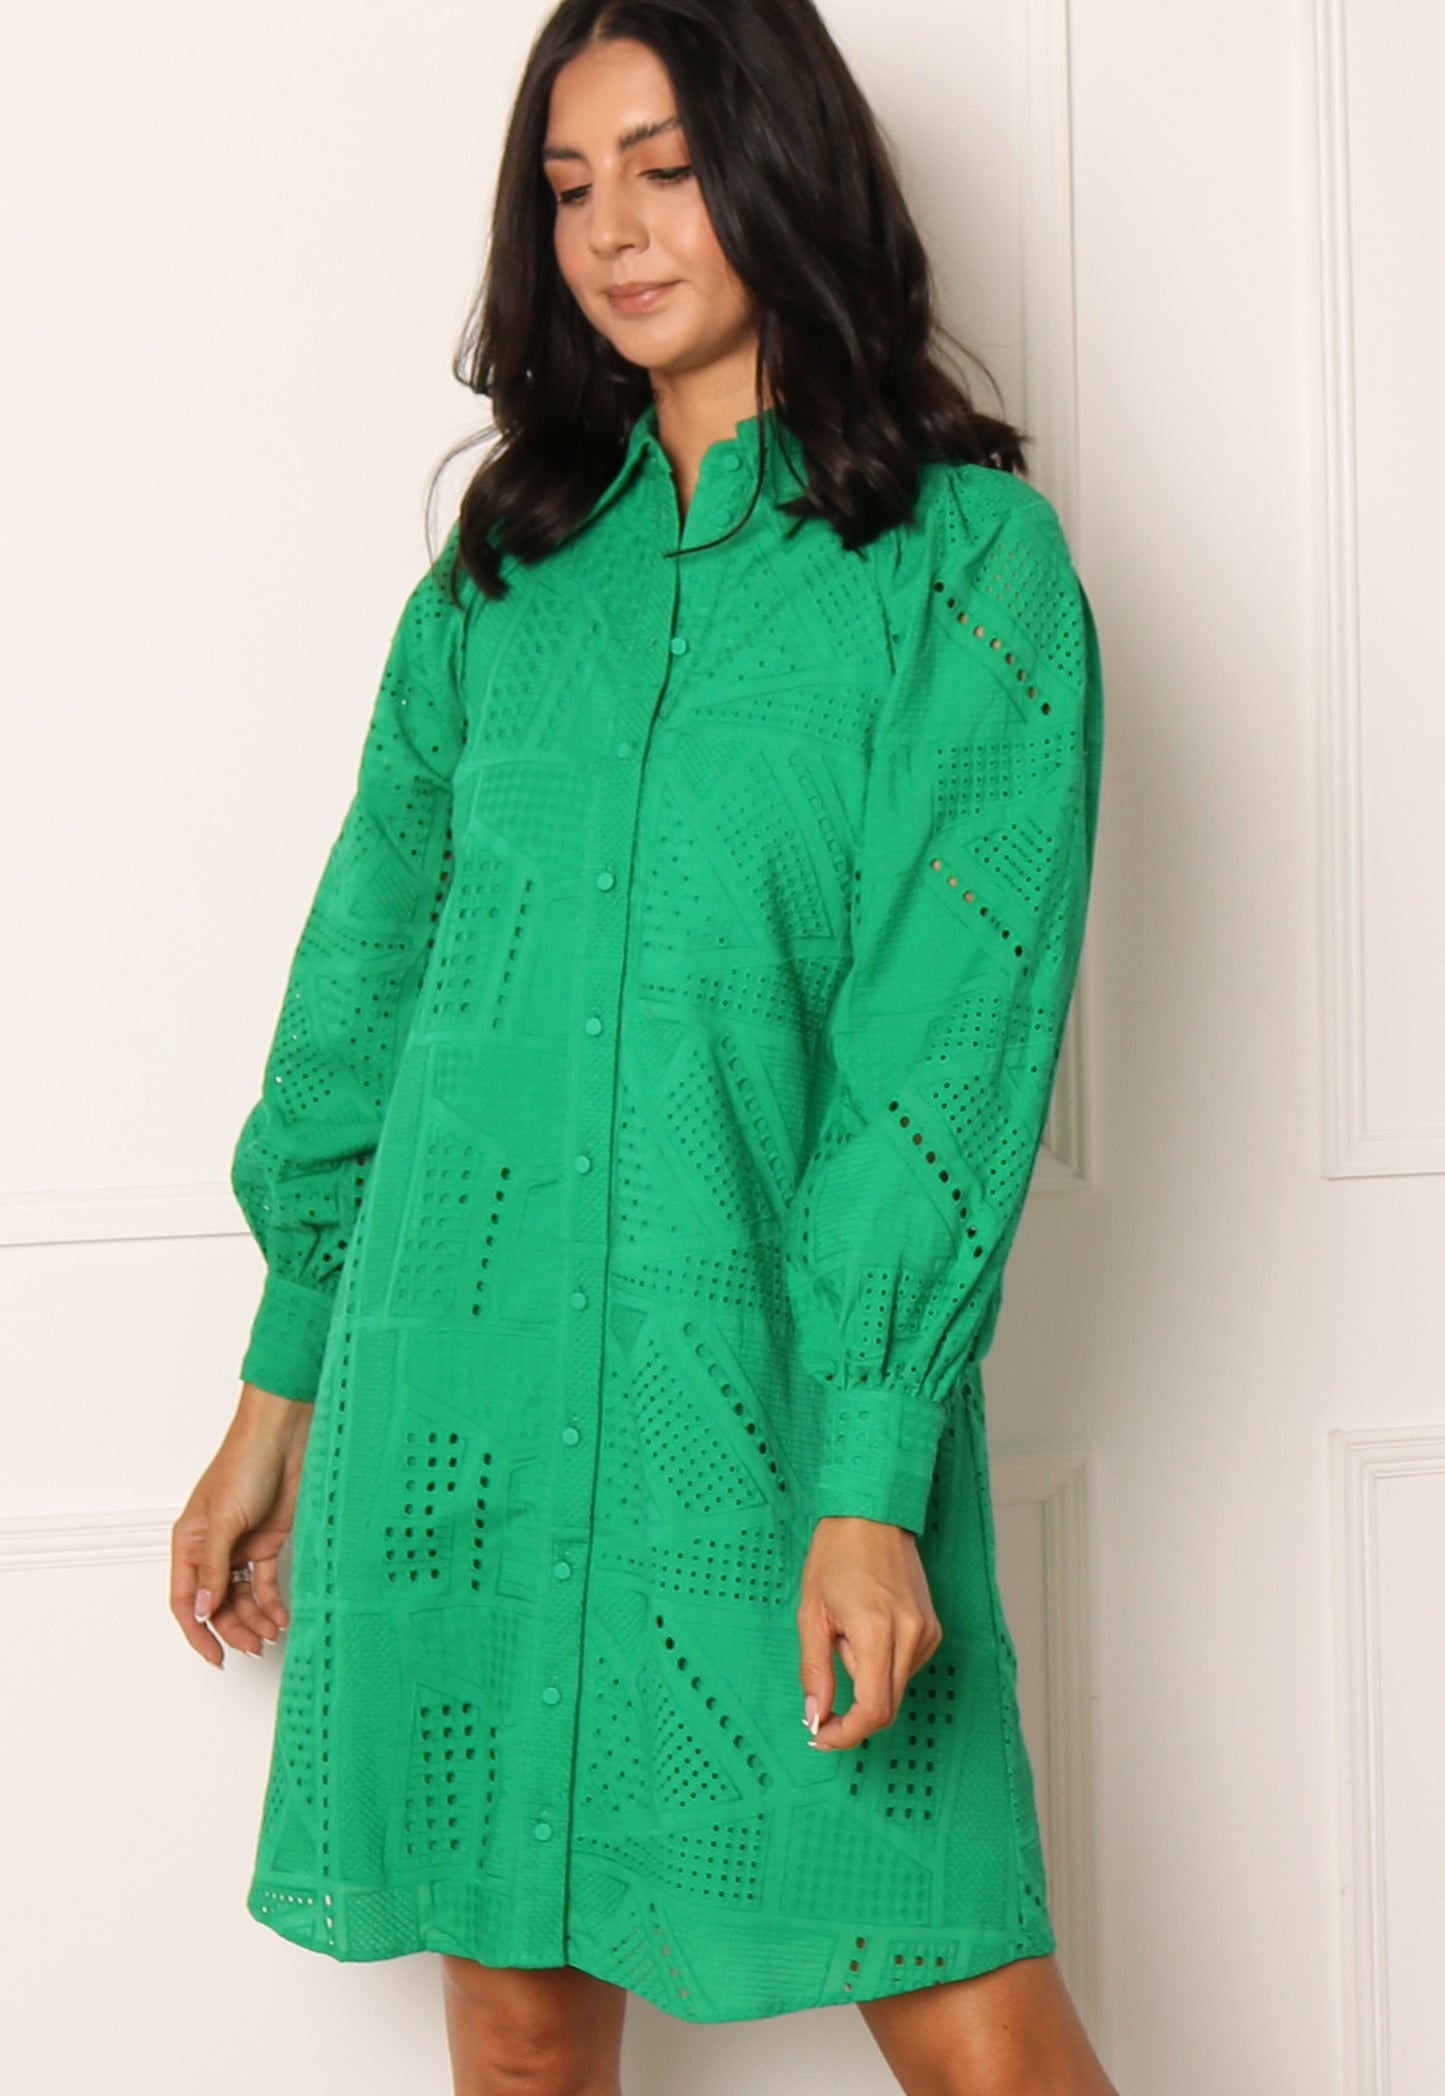 YAS Sado Long Sleeve Broderie Anglaise Shirt Dress in Bright Green - One Nation Clothing